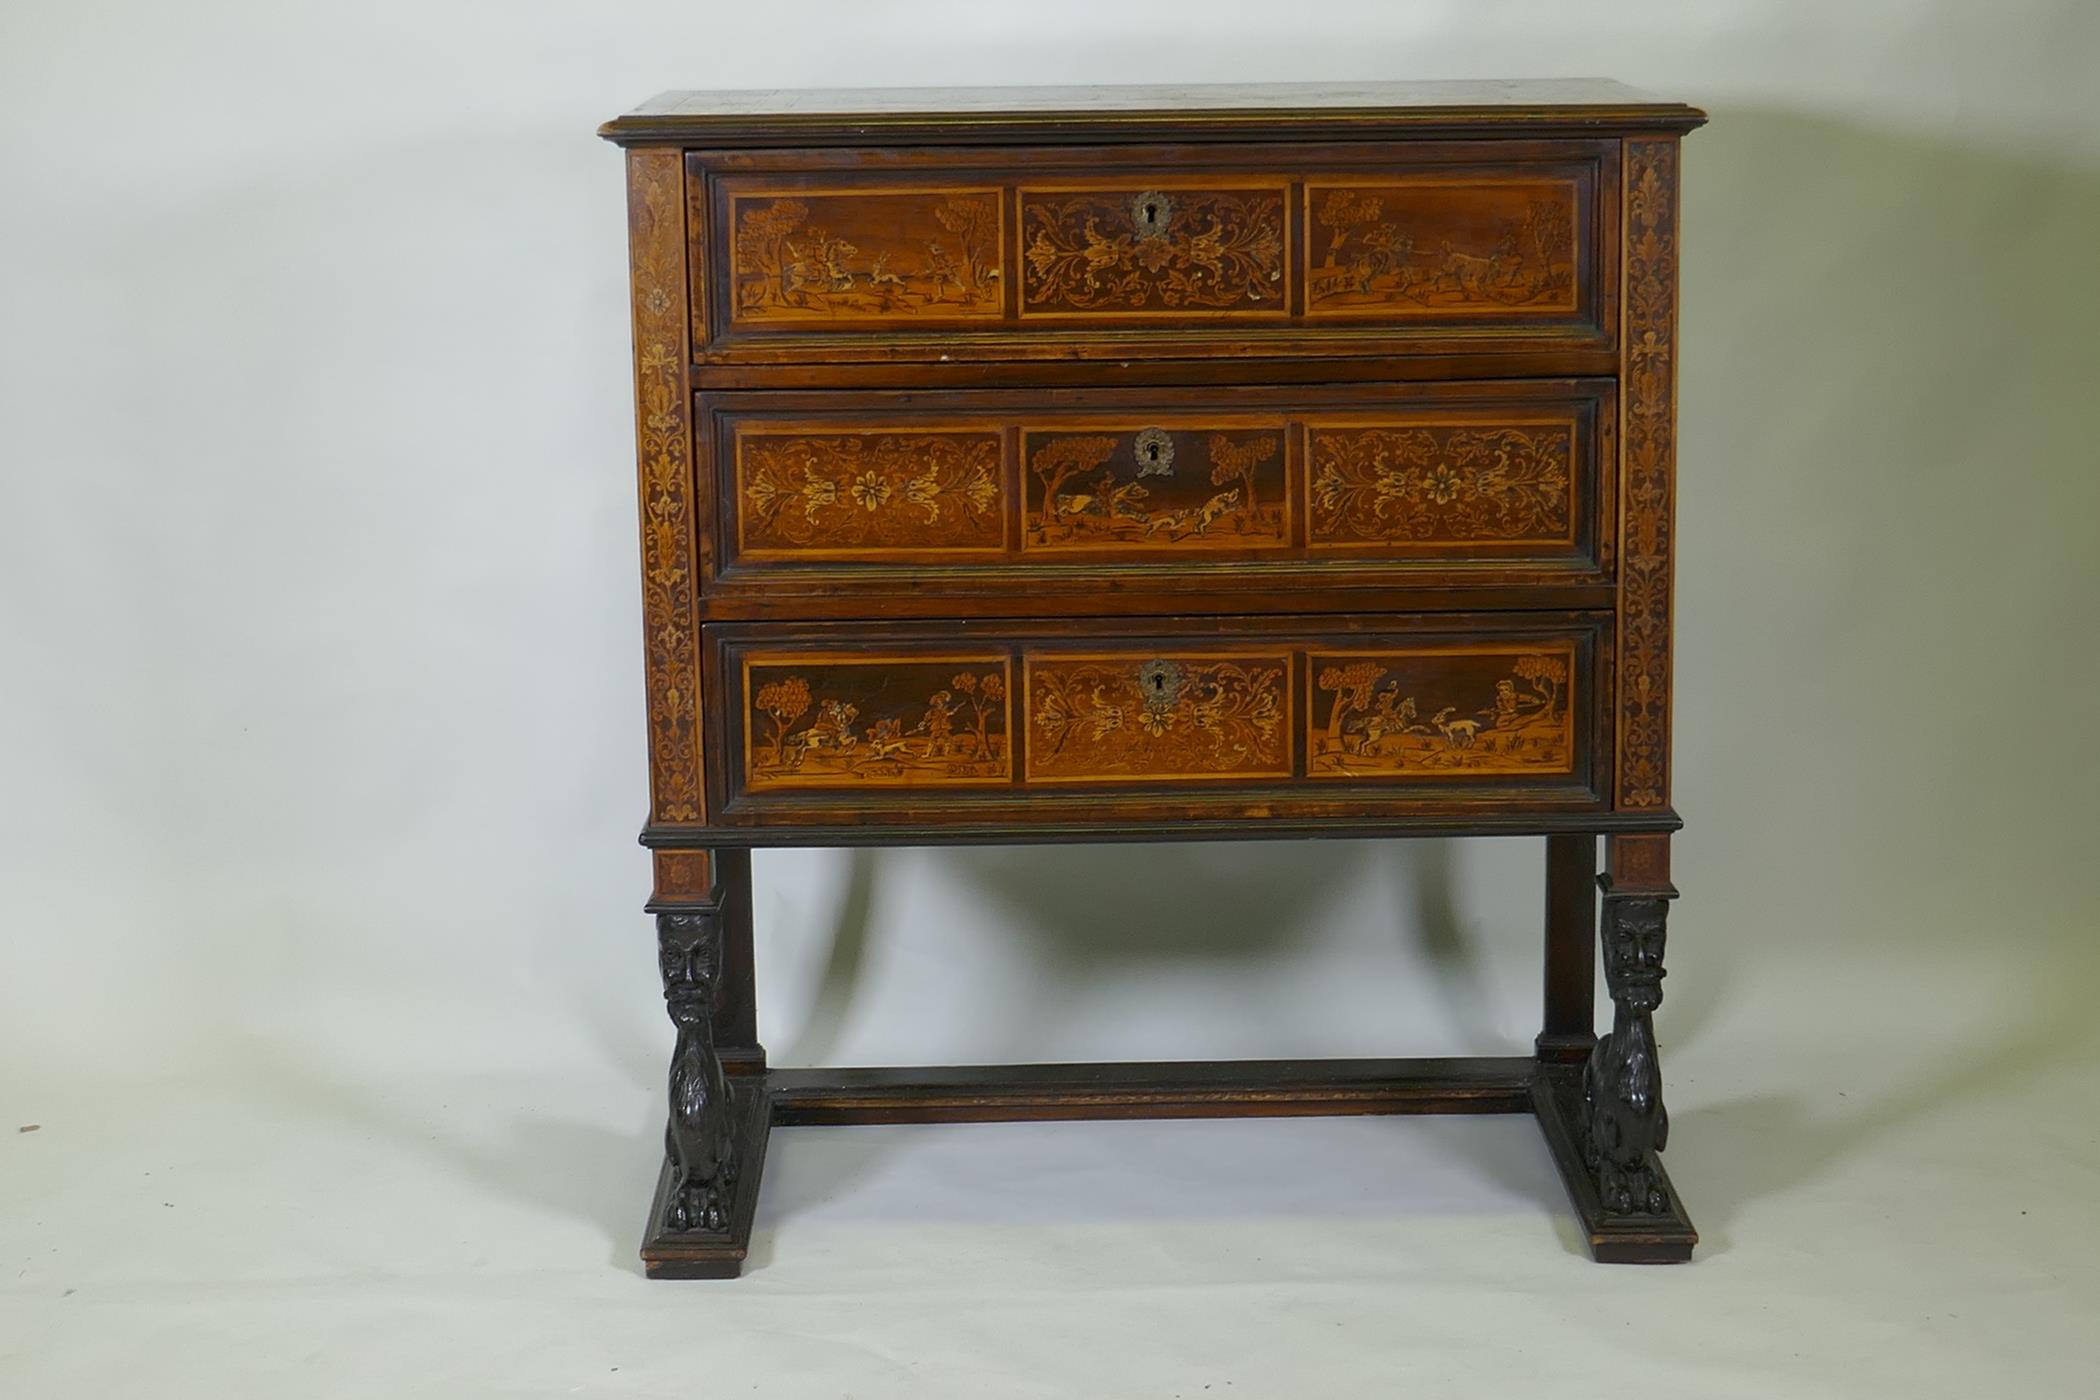 C18th/C19th Italian/Swiss marquetry inlaid walnut chest of three drawers, inlaid with hunting